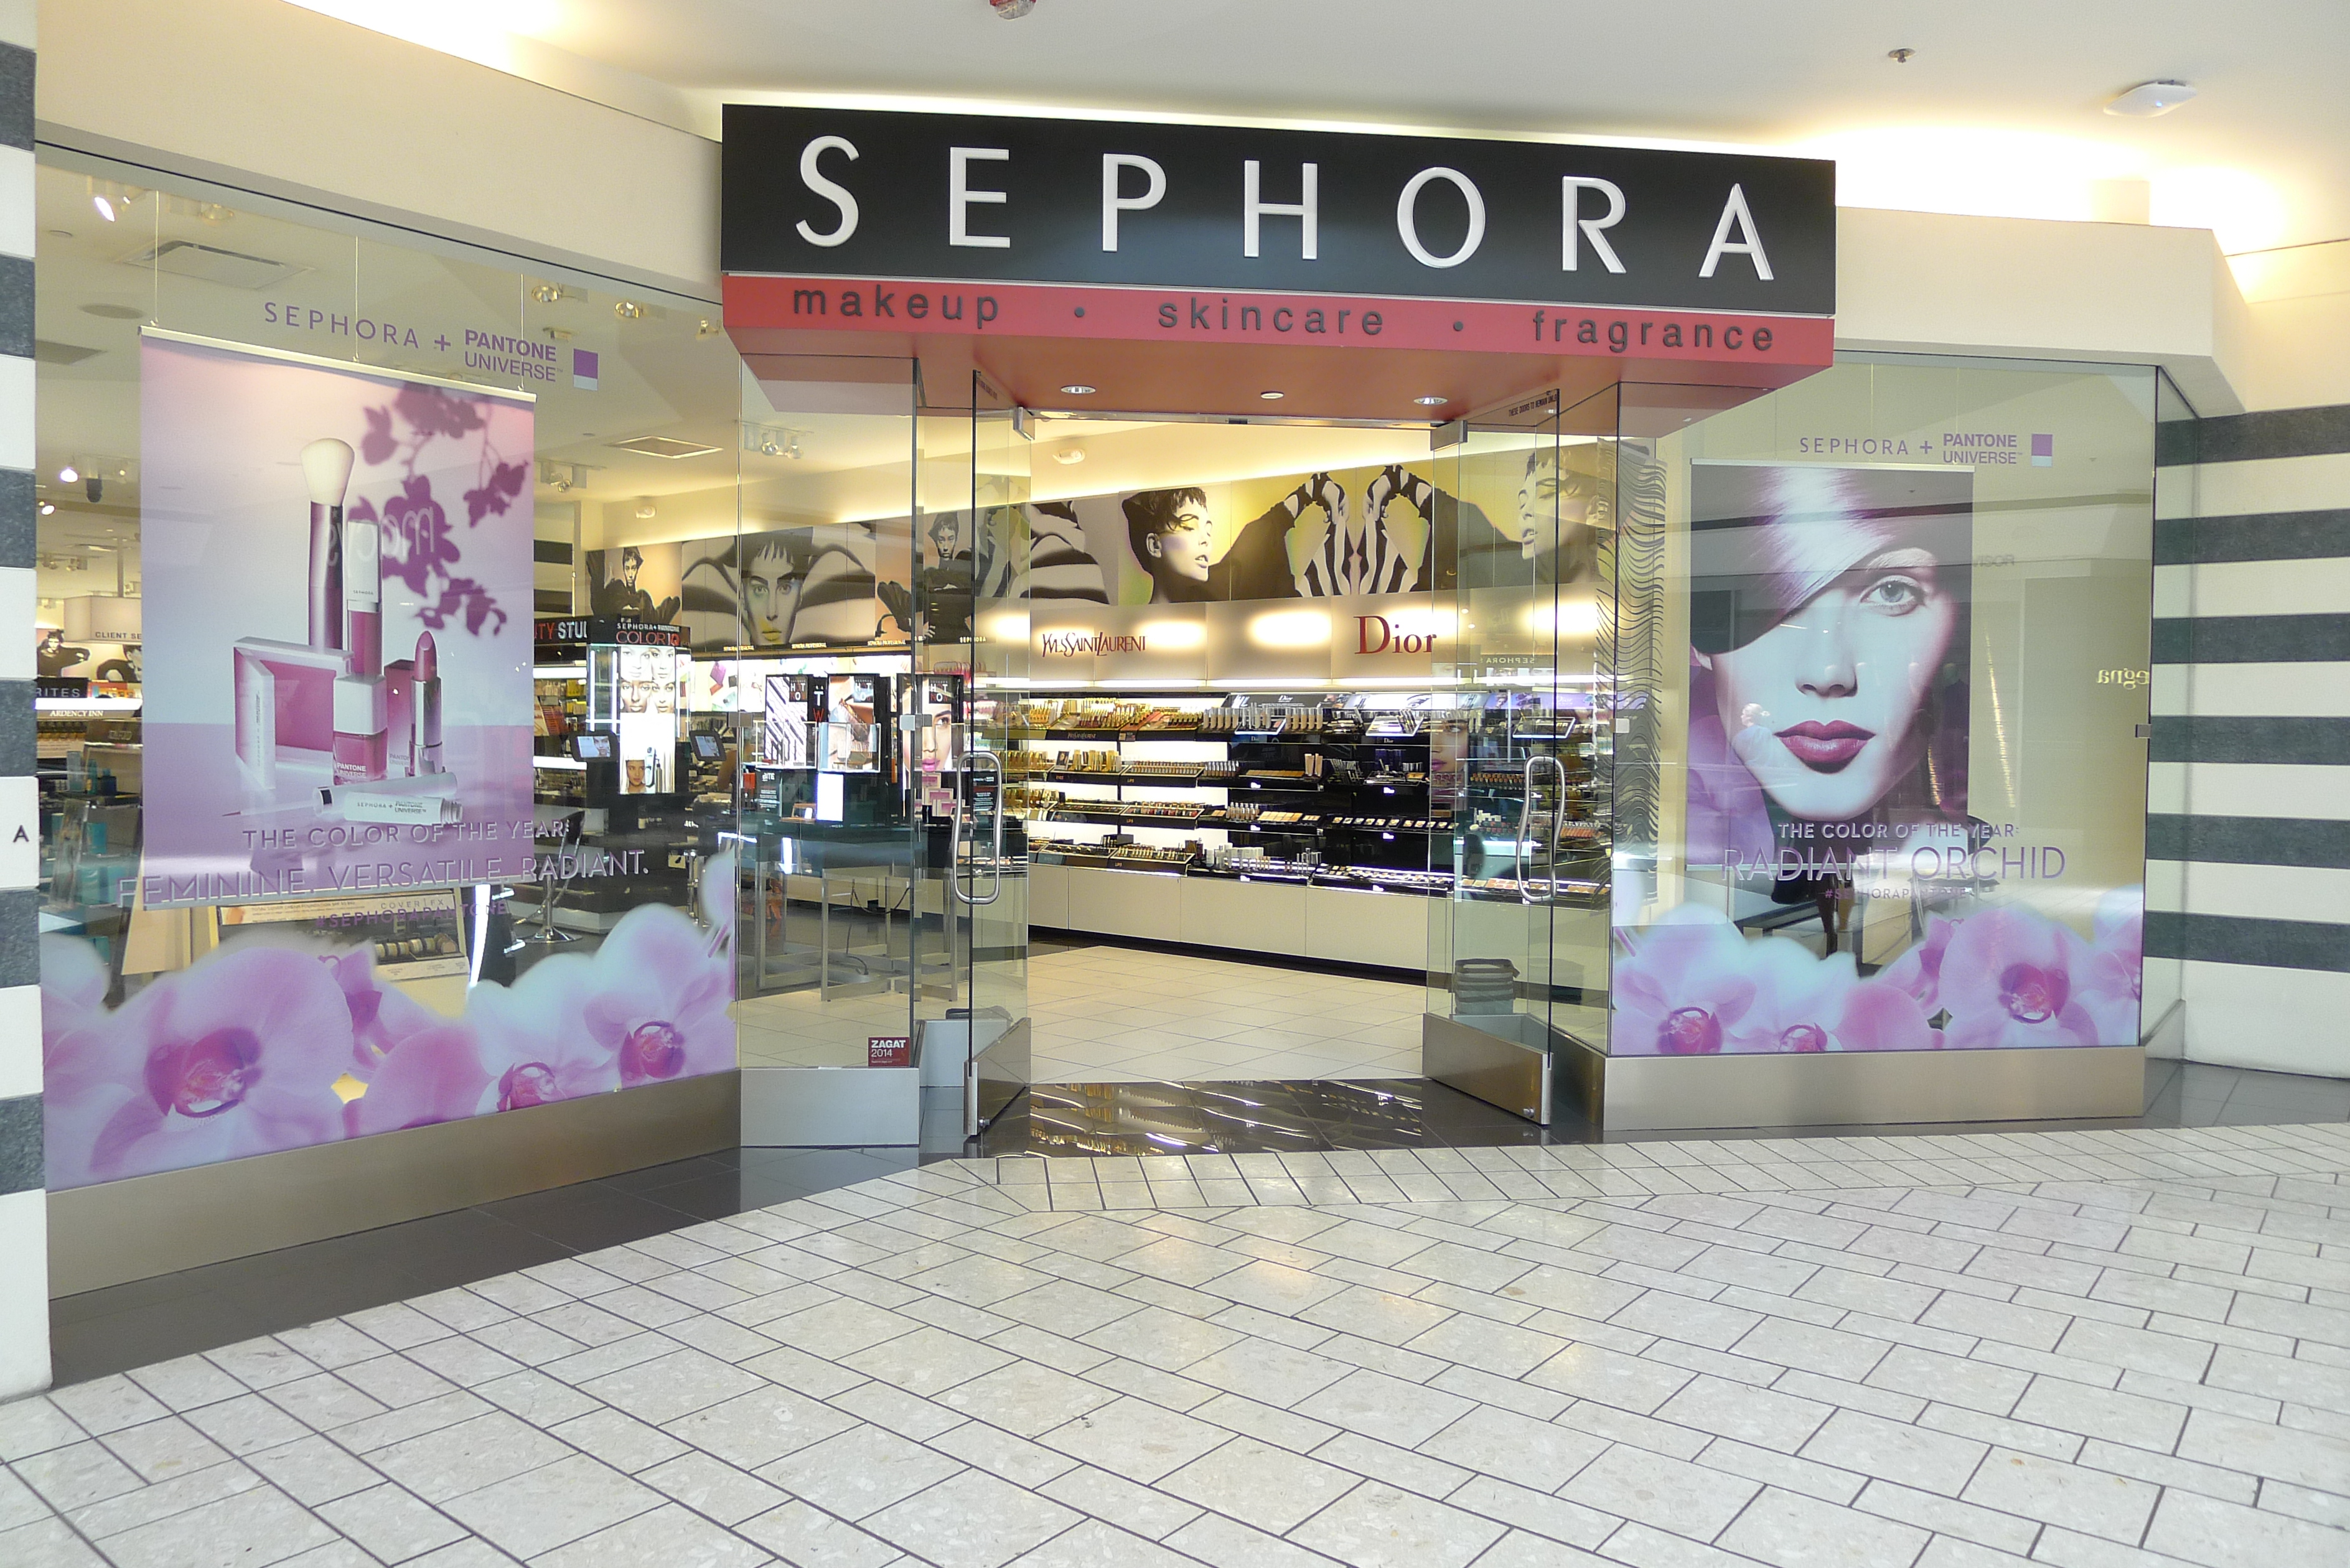 Sephora in Beverly Hills - LOS ANGELES - CALIFORNIA - APRIL 20